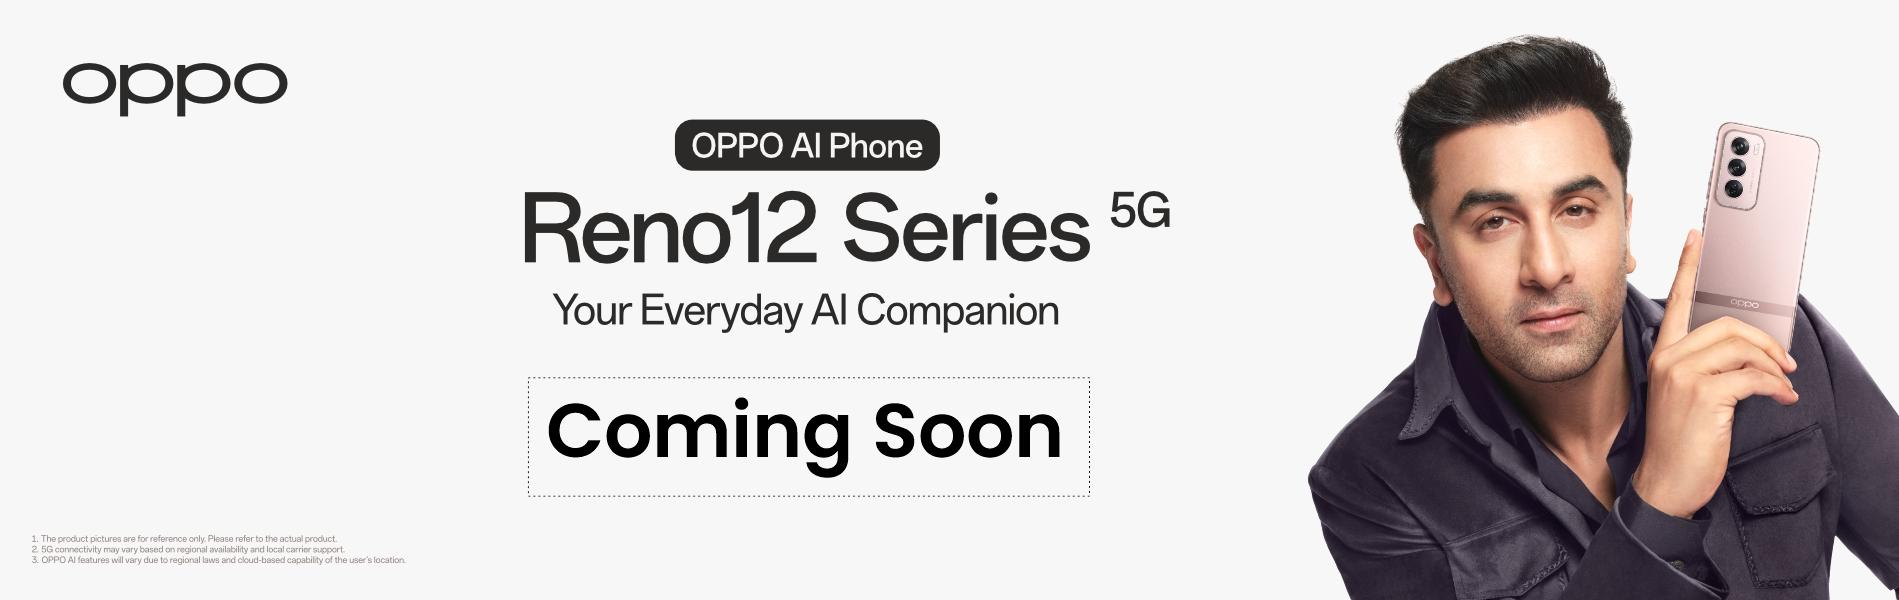 Oppo Reno 12 Coming Soon 